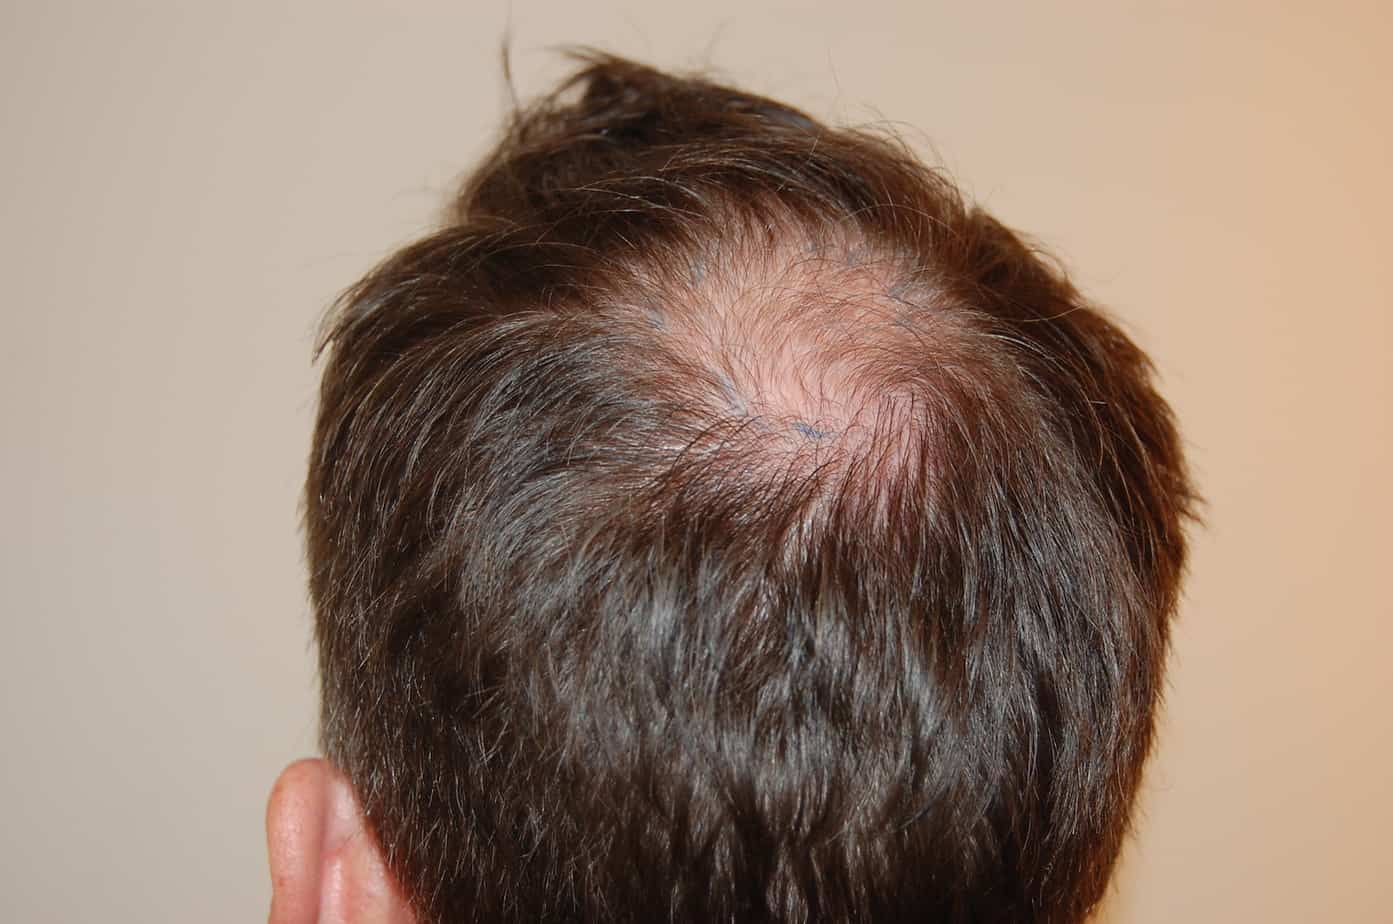 How Much Does A Crown Hair Transplant Cost?